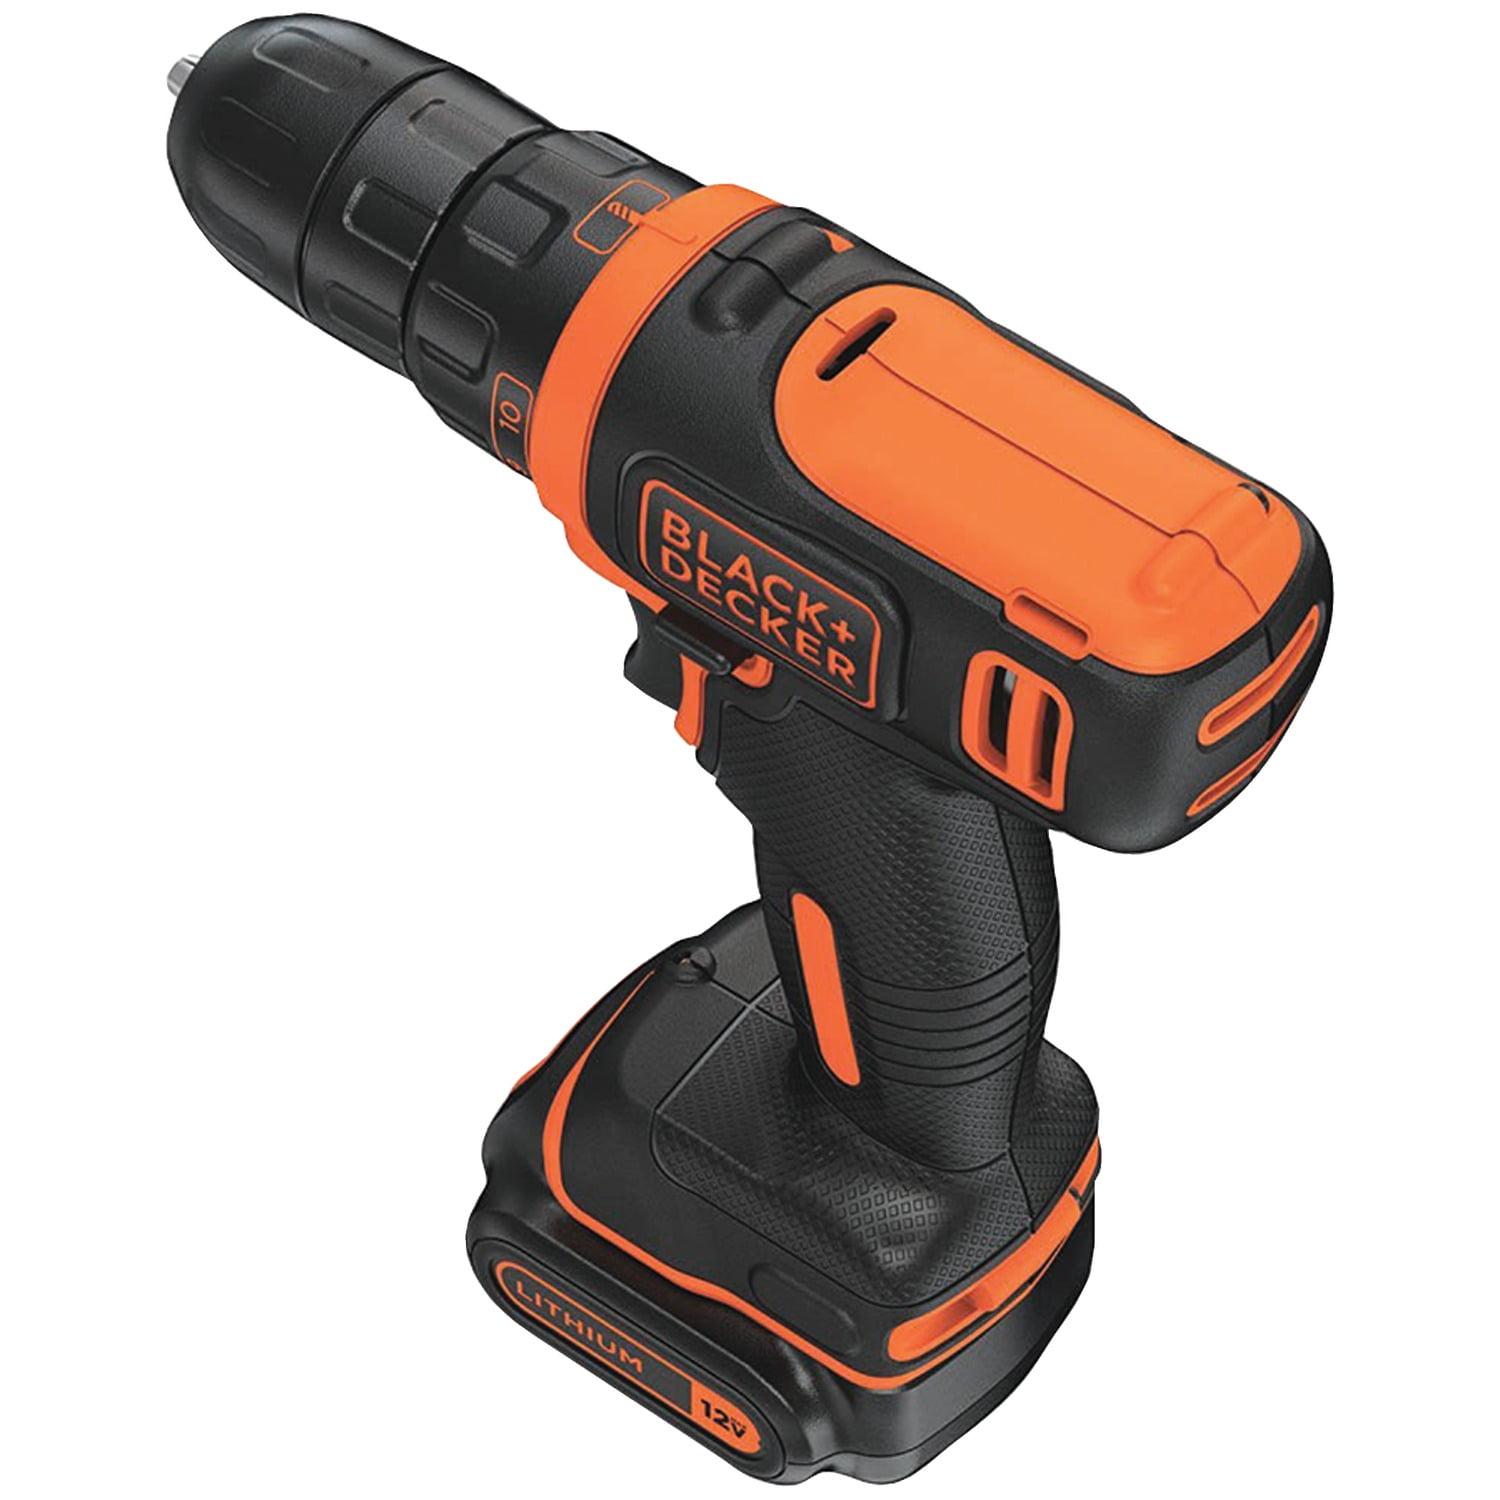 Black+Decker Black+Decker reviva MAX 12V Cordless Drill and Double-Ended  Screwdriver Bit (1 x 12V Battery and 1 x Charger) White REVCDD12C - Best Buy